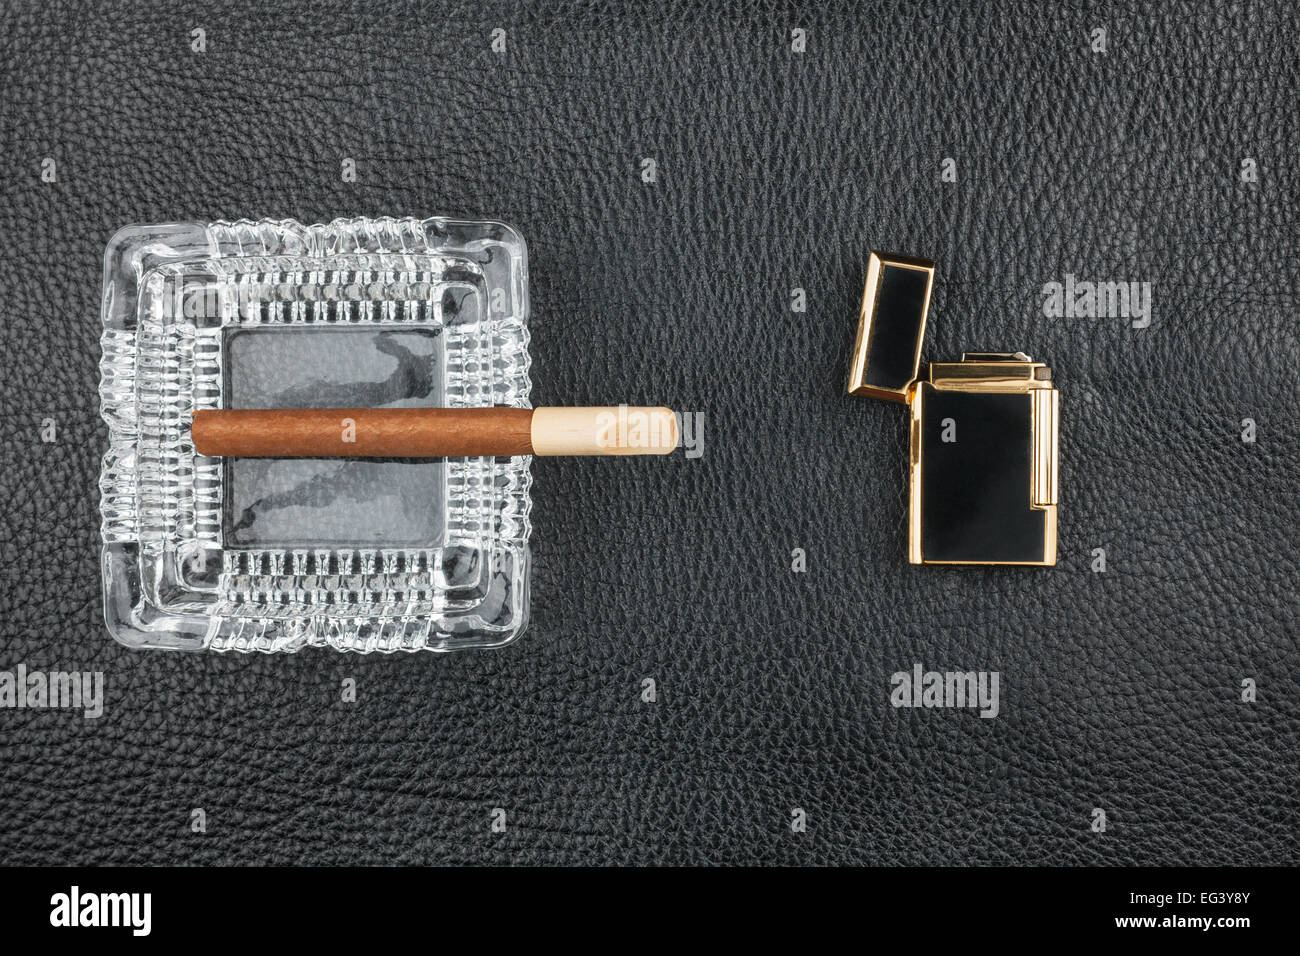 Lighter and glass ashtray with cigar, lying on genuine black leather Stock Photo